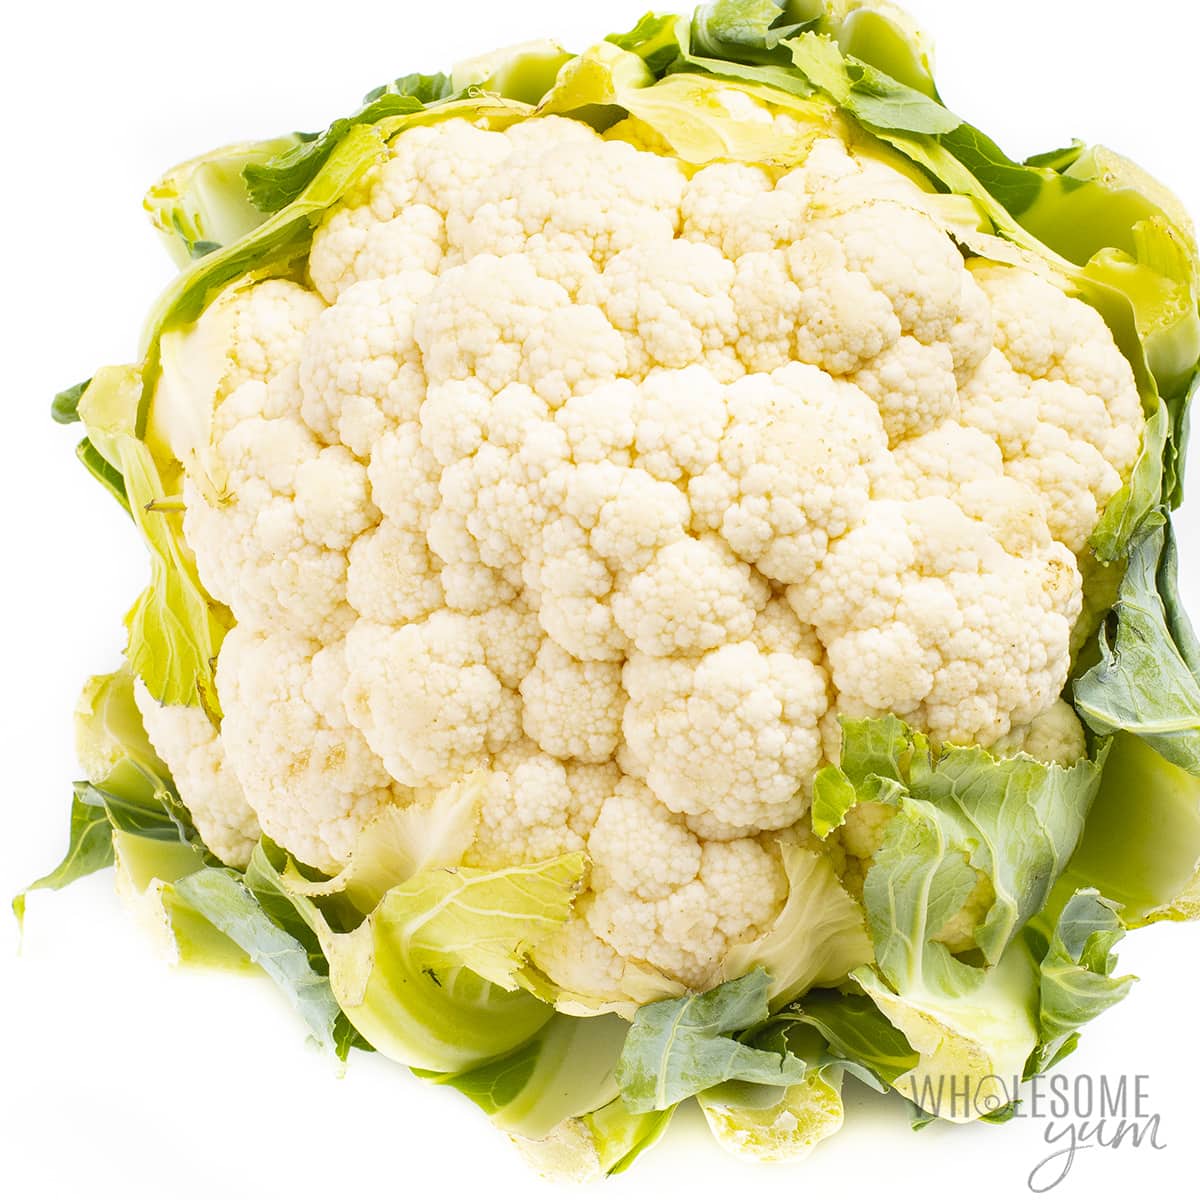 This head of cauliflower is keto friendly! Carbs in cauliflower are very low.